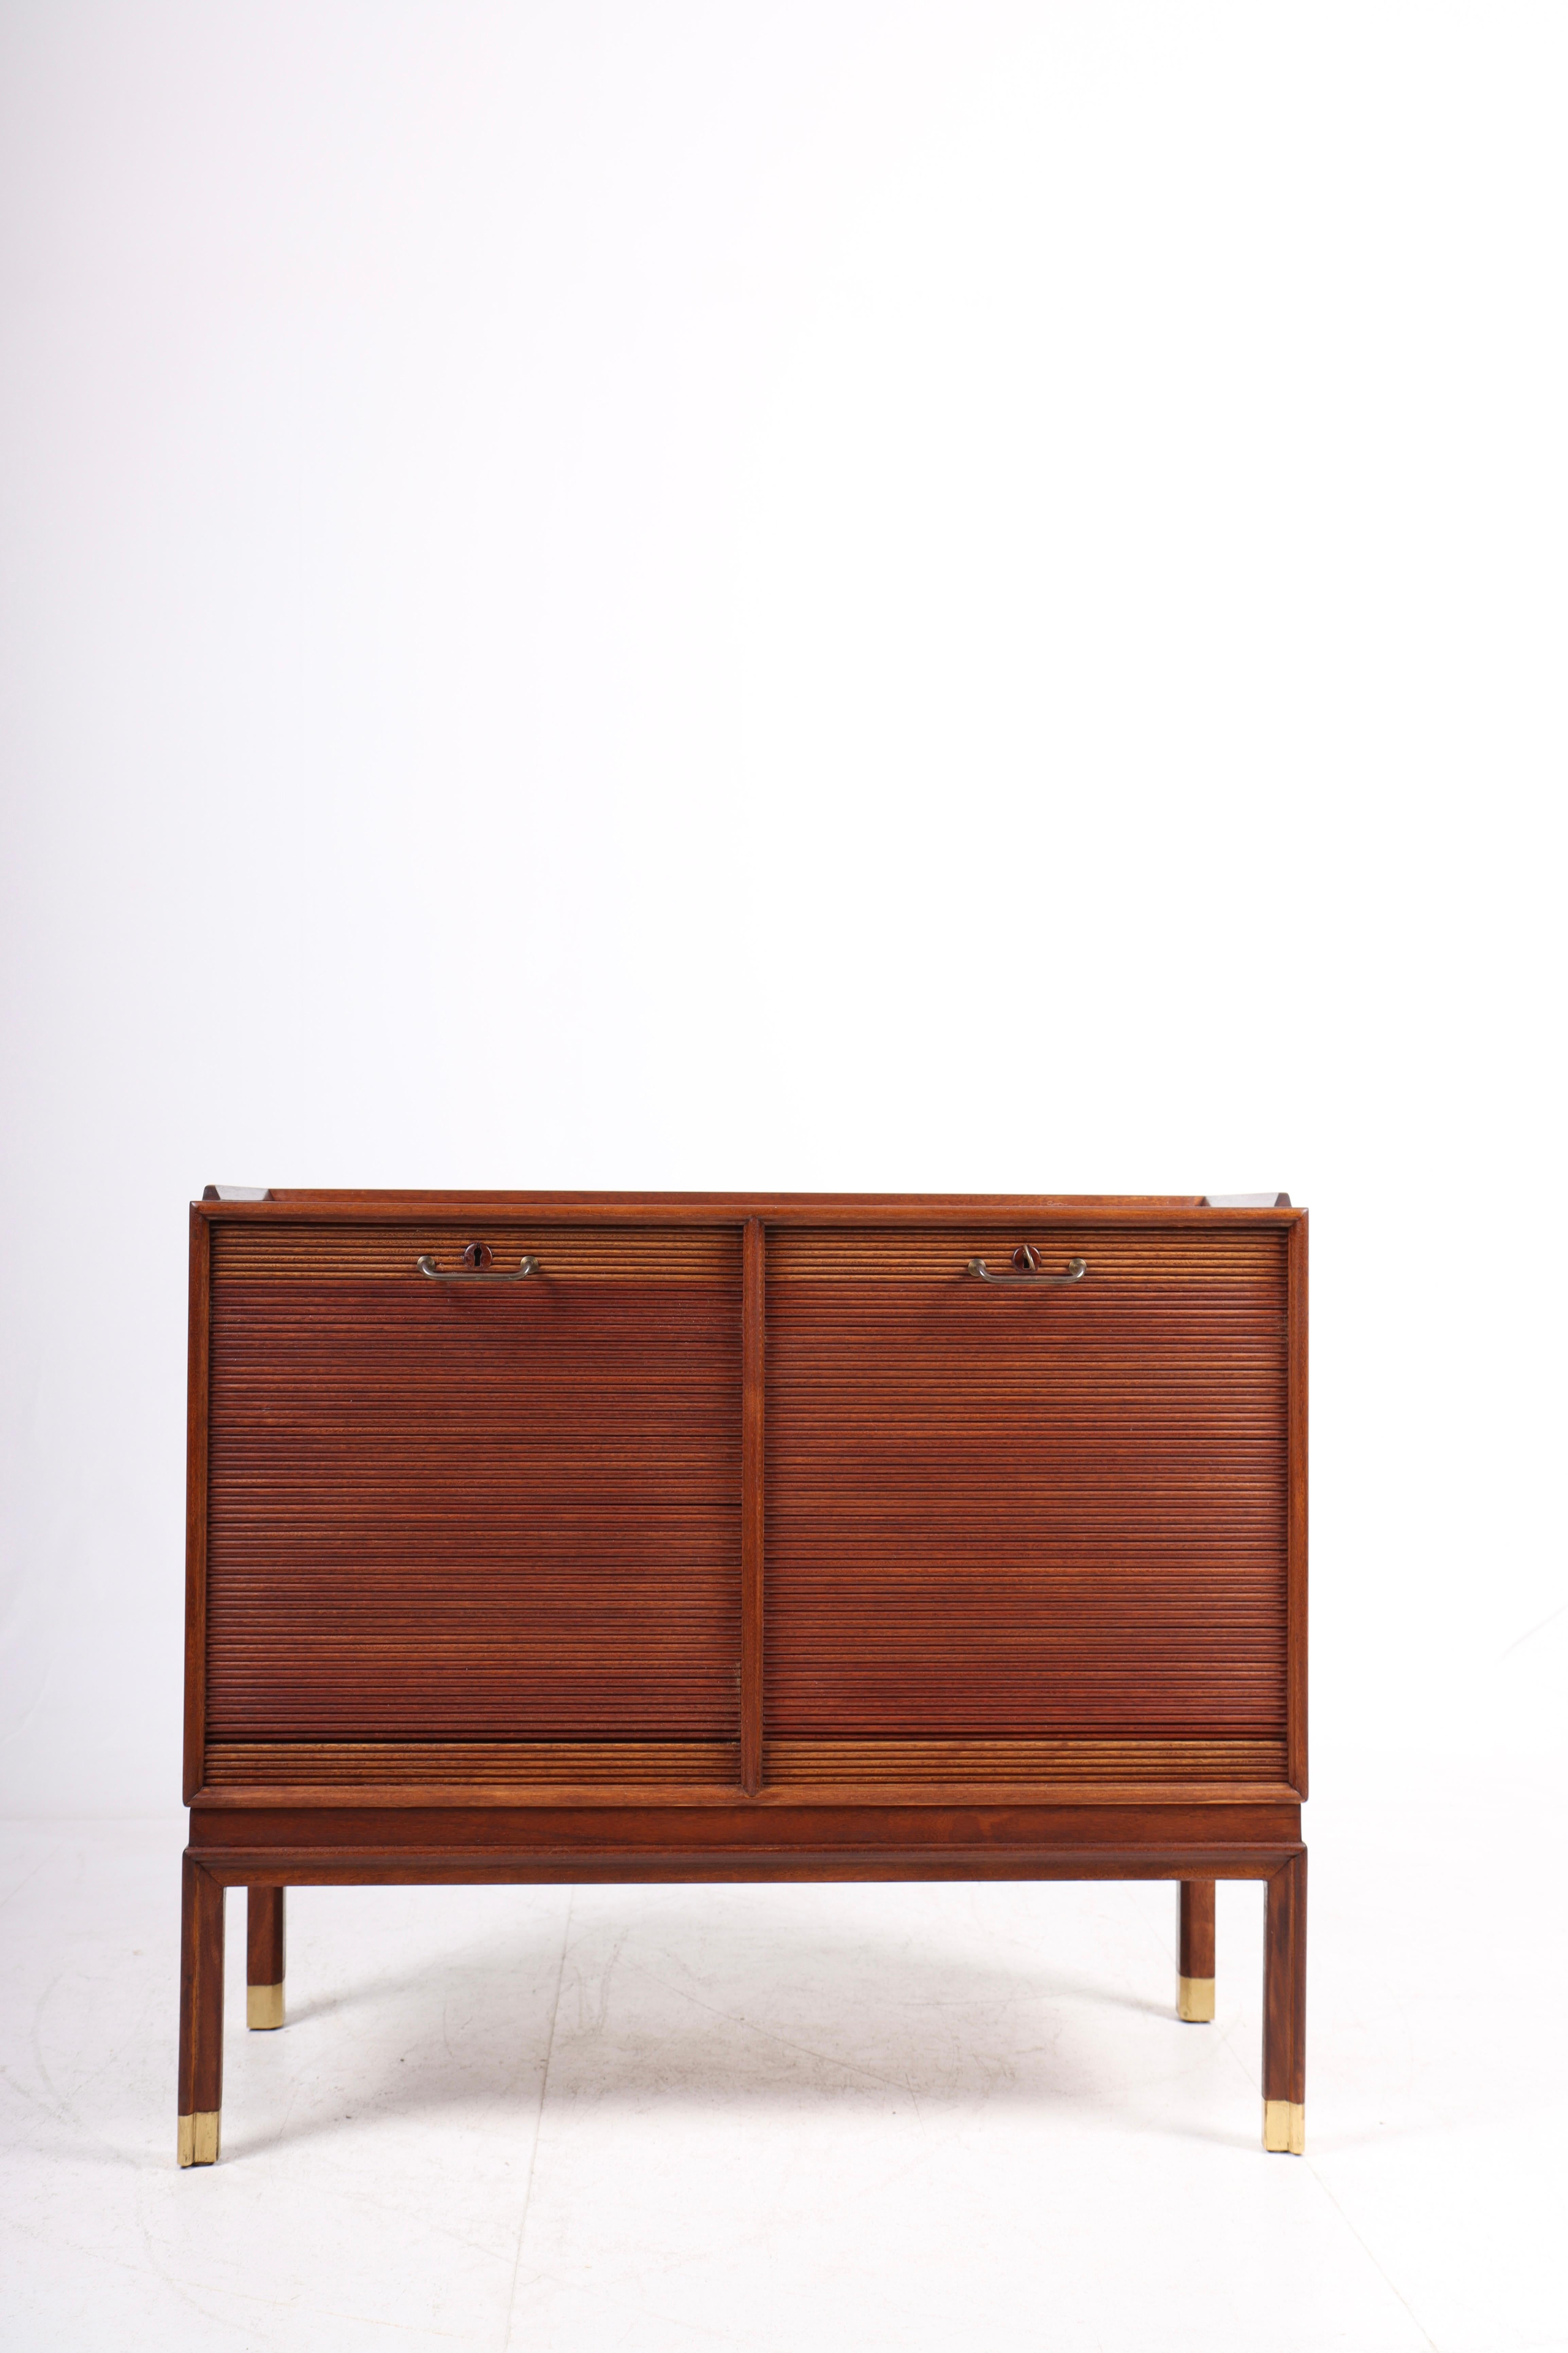 Cabinet in mahogni with tambour doors and brass shoes. Designed and made by a Danish cabinetmaker. Great condition.